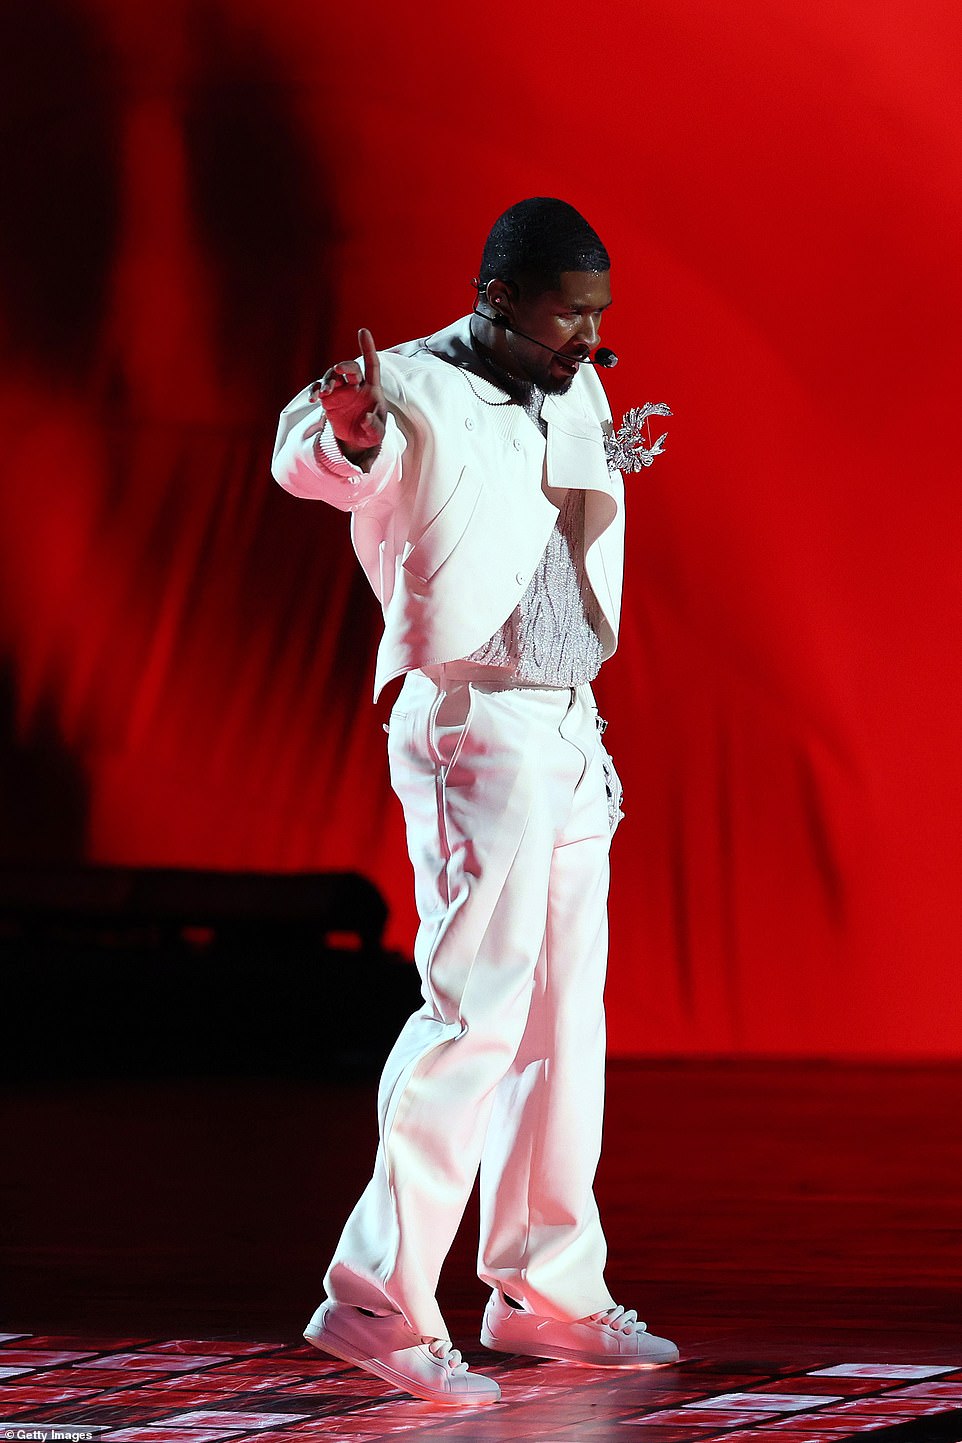 Usher, 45, was the halftime show performer. The R&B star put on a major showcase of his decades of hits